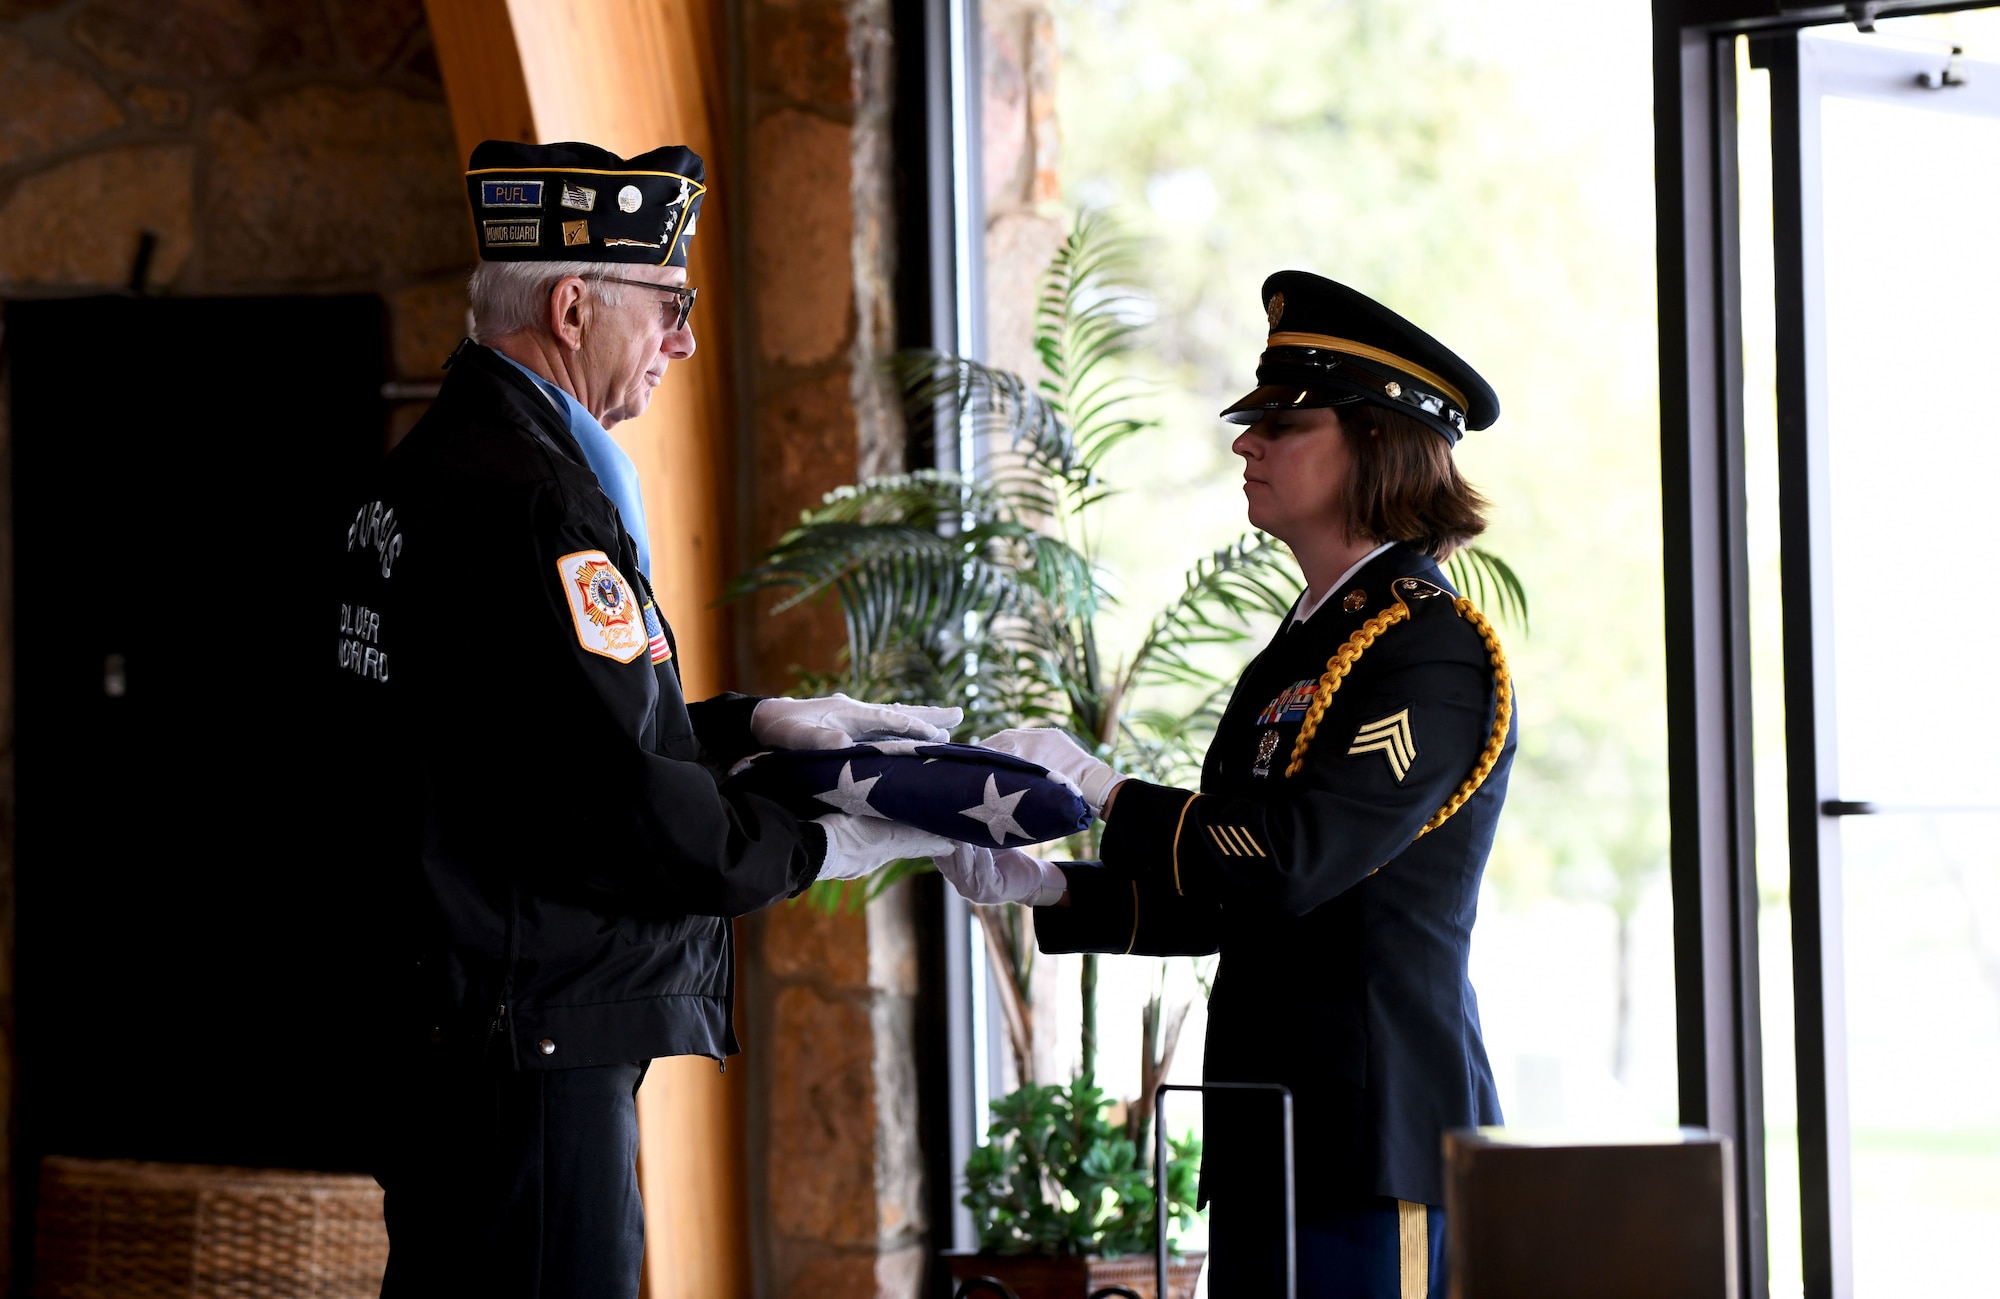 A South Dakota Army National Guardsman hands a folded burial flag over to a member of the Sturgis Honor Guard before it is presented to the family of former Pfc. Carroll E. Lonas at the Black Hills National Cemetery in Sturgis, S.D., May 9, 2019. Lonas was captured by the Germans during World War II and was detained for 14 months prior to his escape. He hiked roughly 1,100 miles until he reached friendly territory. (U.S.  Air Force photo by Airman 1st Class Christina Bennett)